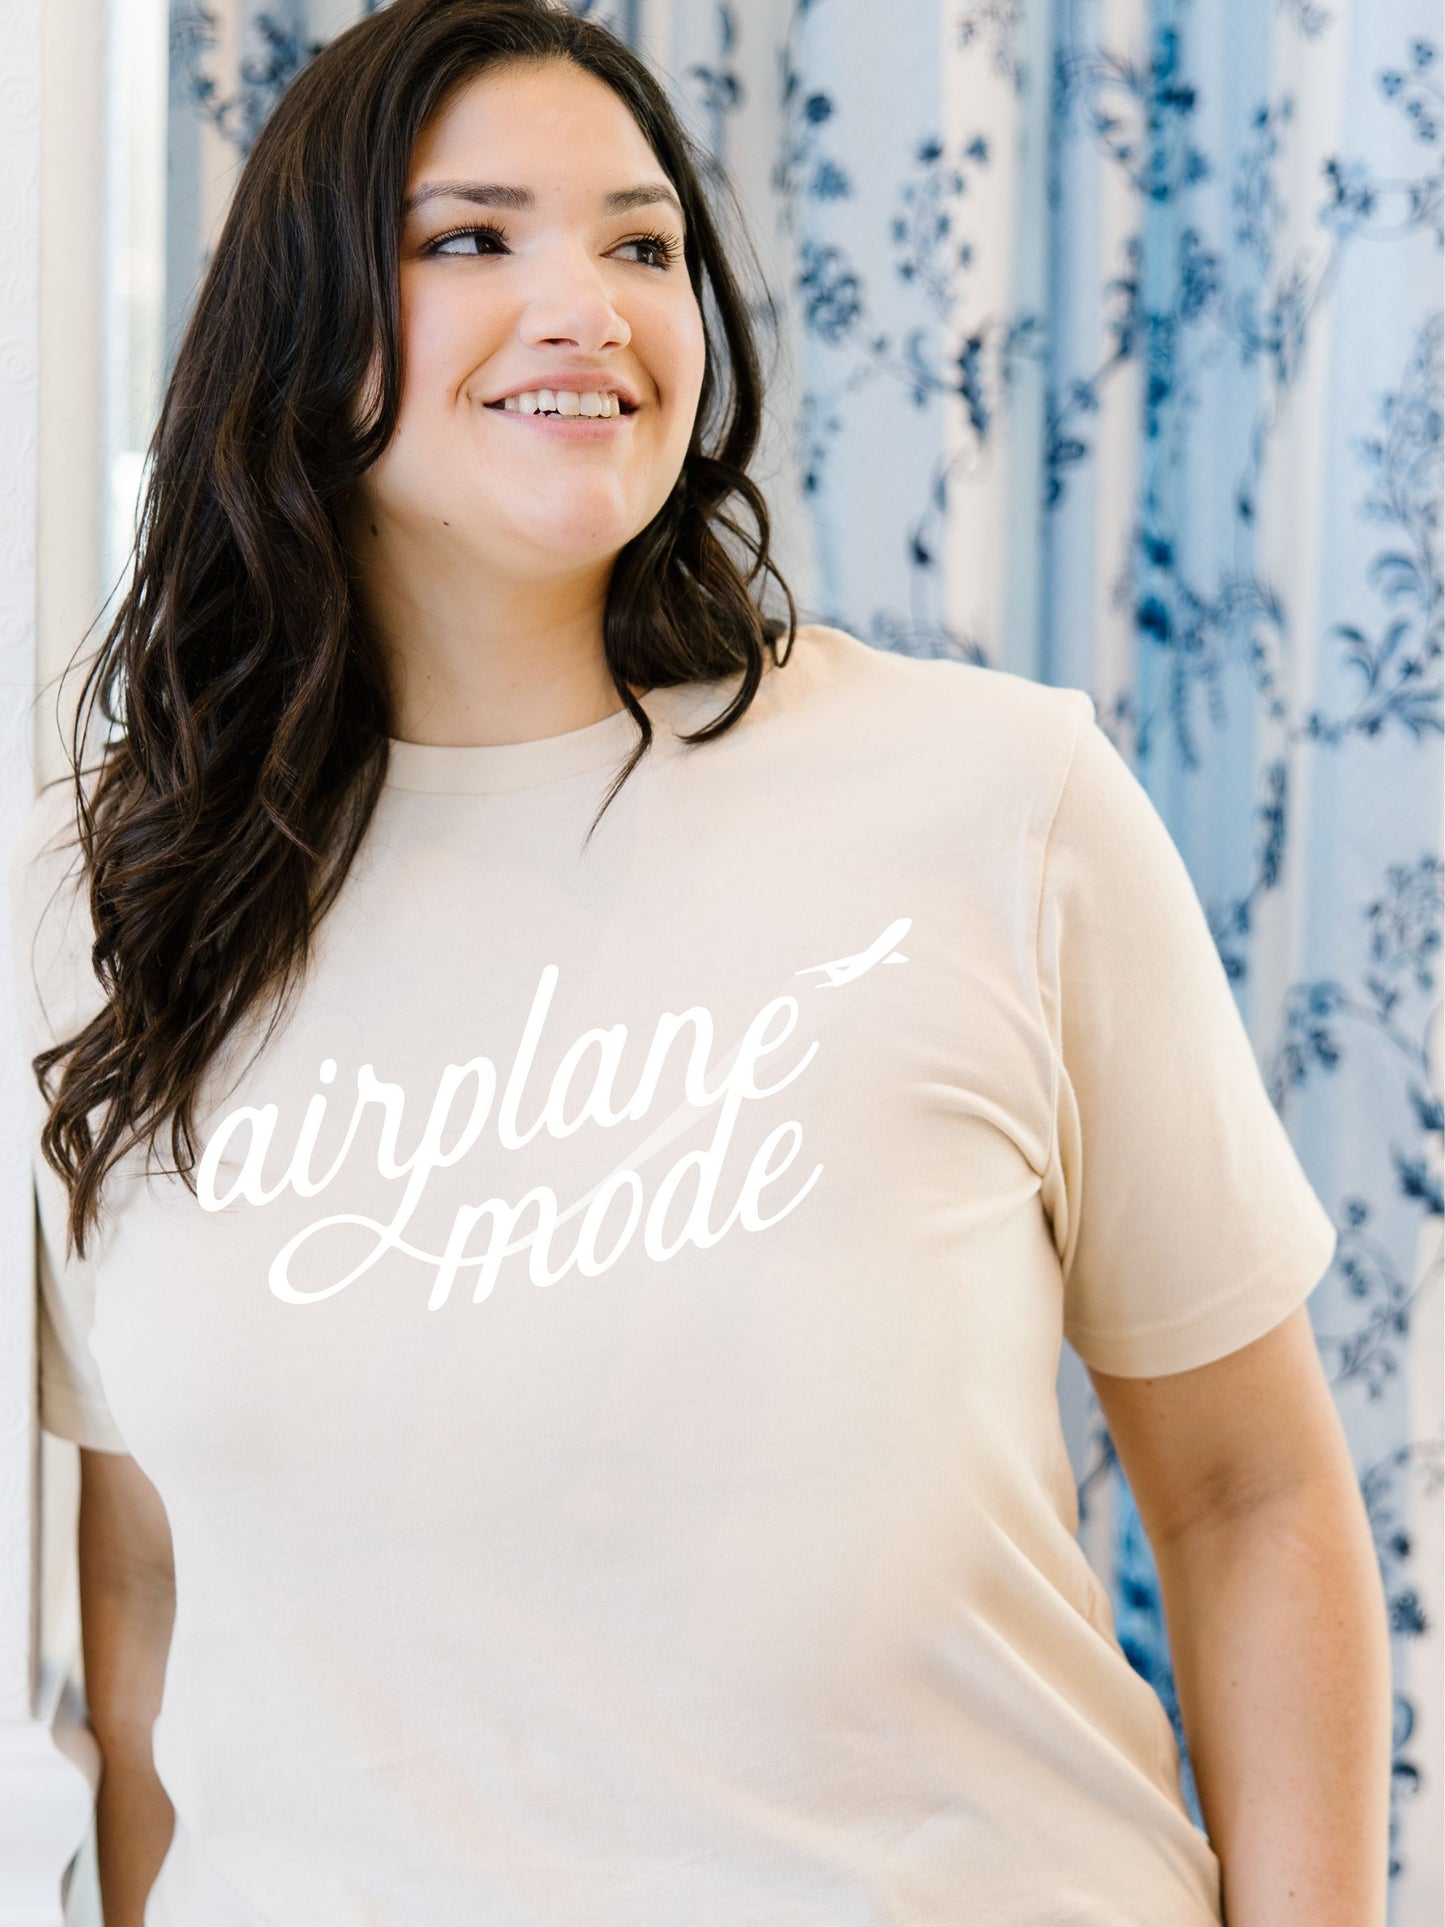 Airplane Mode Shirt in color Soft Cream for girls trip